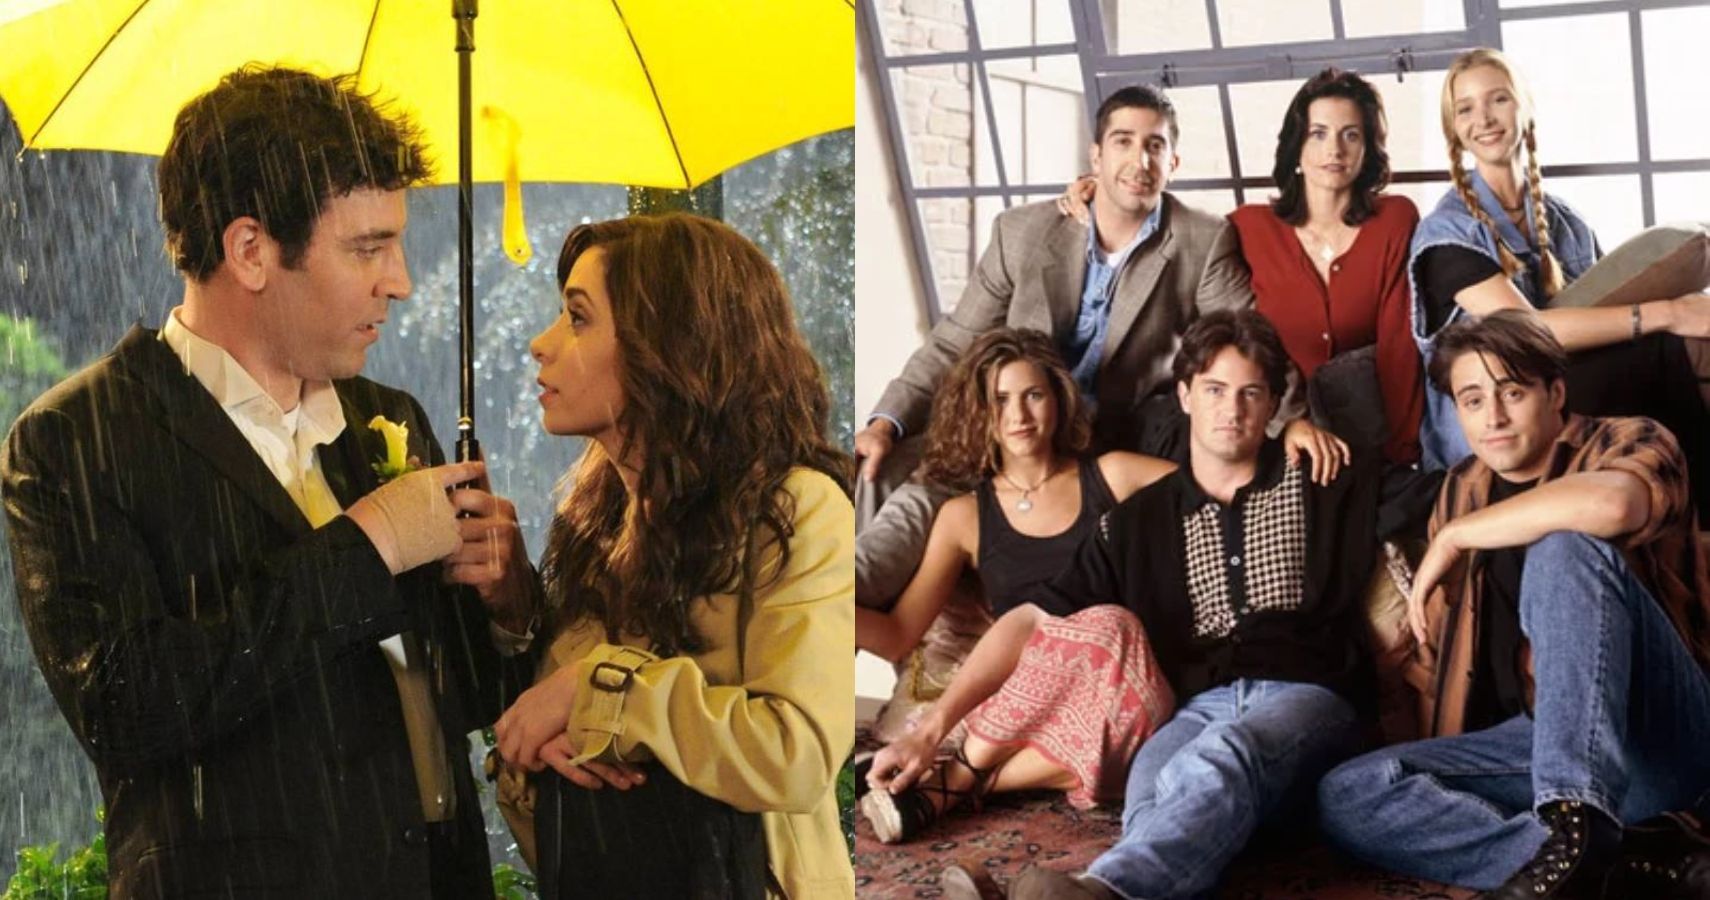 5 Things HIMYM Does Better Than Friends (& Vice Versa)